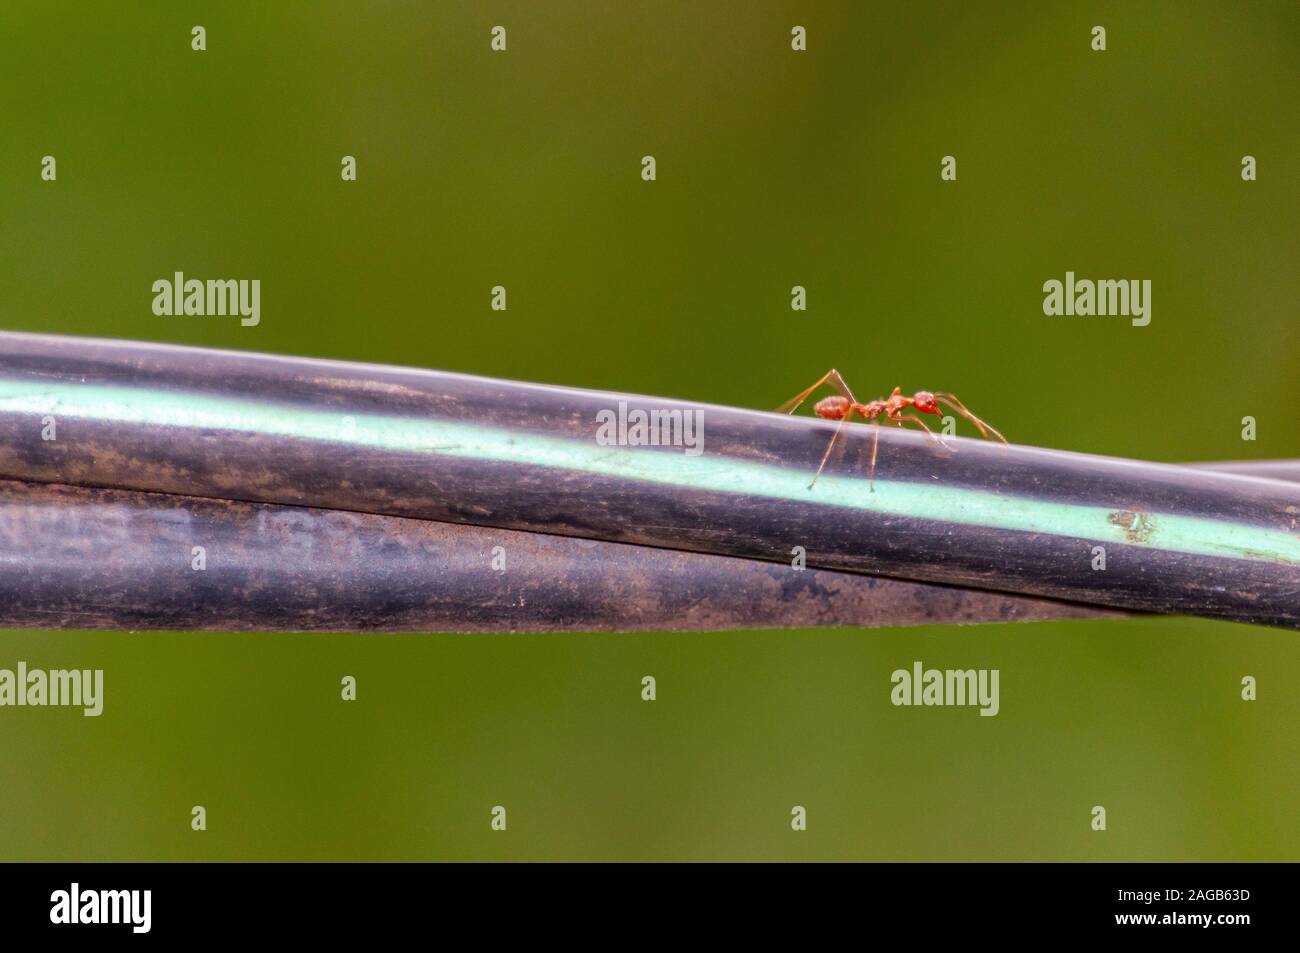 Macro photography shot of a strong red ant on a metal pole with a blurred green background Stock Photo